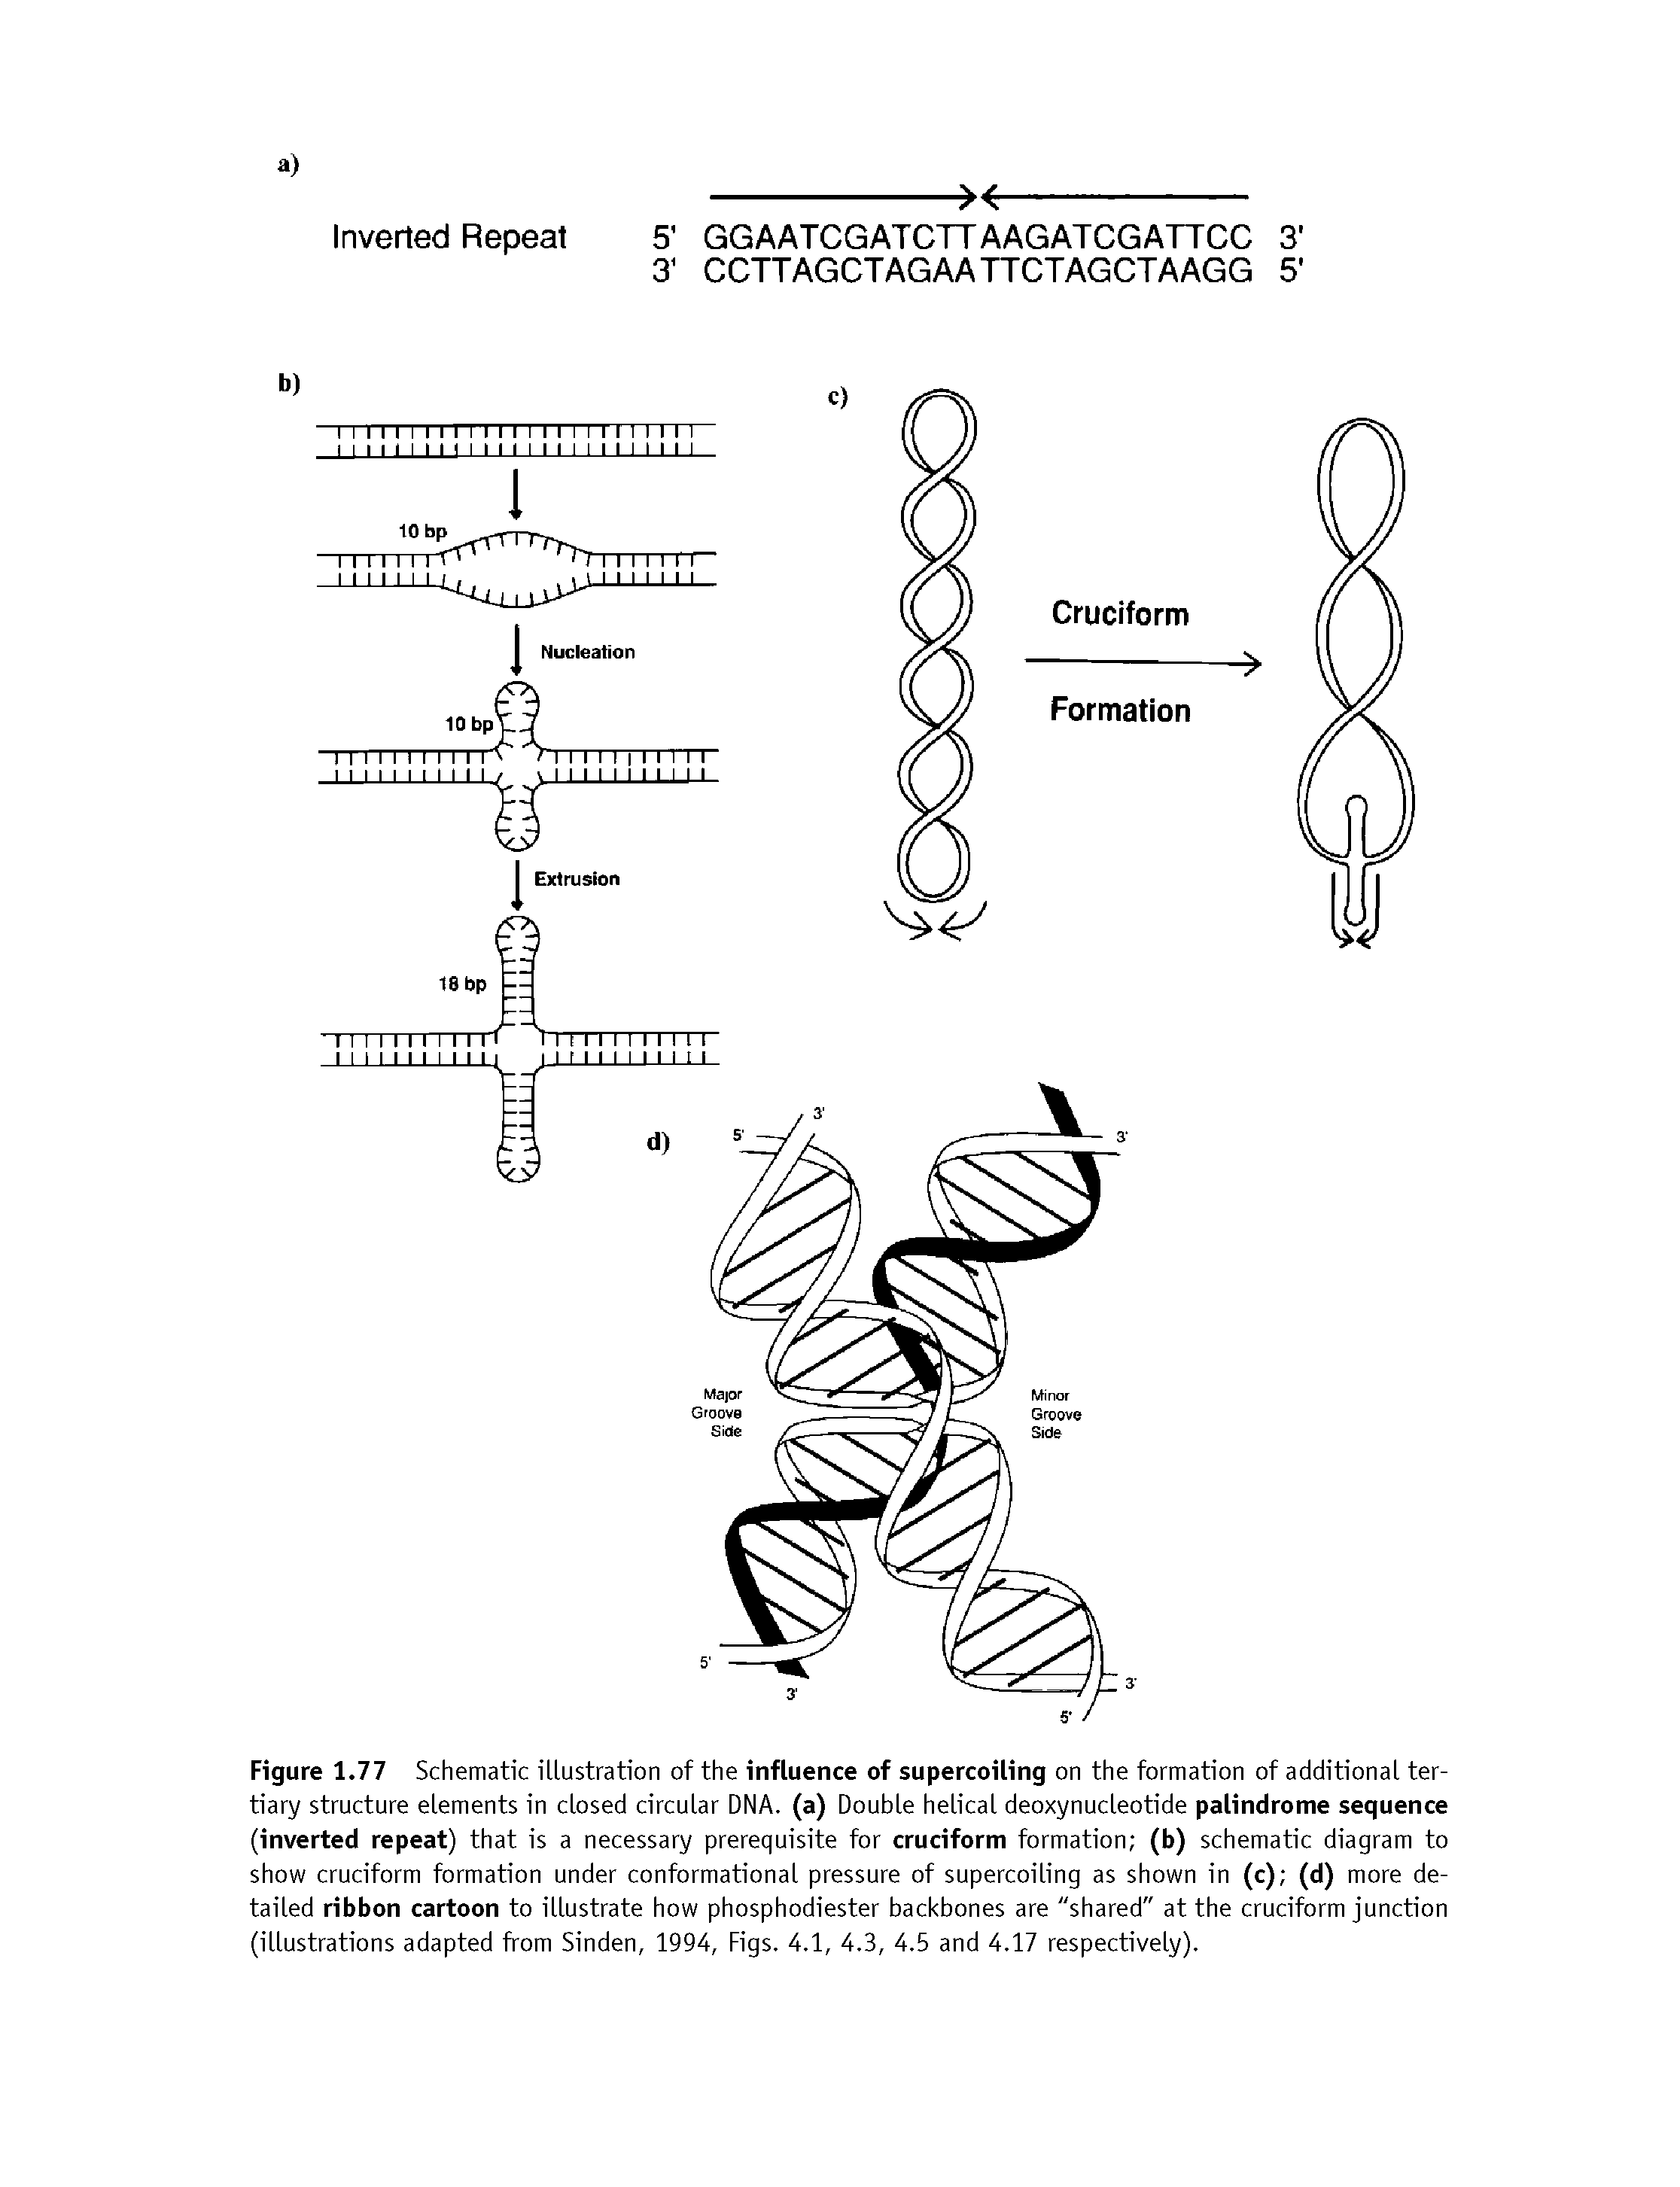 Figure 1.77 Schematic illustration of the influence of supercoiling on the formation of additional tertiary structure elements in closed circular DNA. (a) Double helical deoxynucleotide palindrome sequence (inverted repeat) that is a necessary prerequisite for cruciform formation (b) schematic diagram to show cruciform formation under conformational pressure of supercoiling as shown in (c) (d) more detailed ribbon cartoon to illustrate how phosphodiester backbones are "shared" at the cruciform junction (illustrations adapted from Sinden, 1994, Figs. 4.1, 4.3, 4.5 and 4.17 respectively).